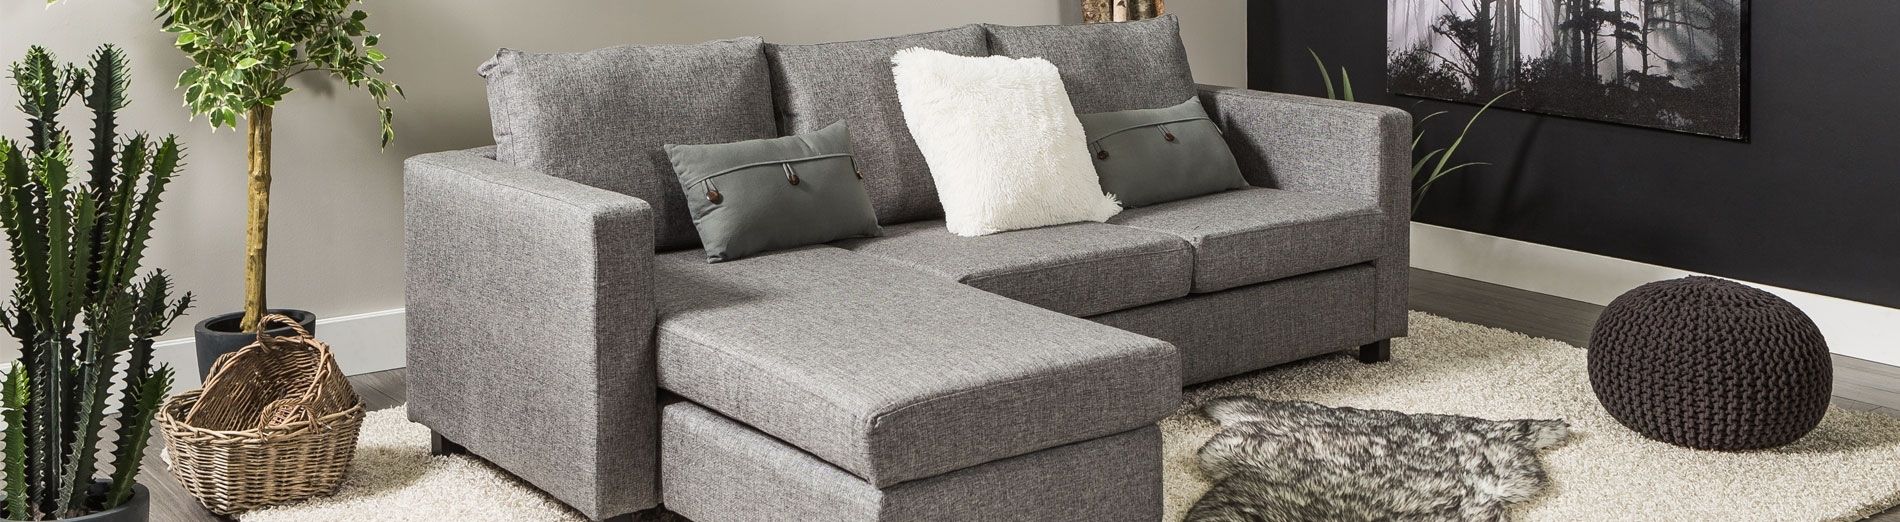 Sofas & Sofabeds & Futons | Living Room Furniture | Furniture | Jysk Pertaining To Jysk Sectional Sofas (Photo 5 of 10)